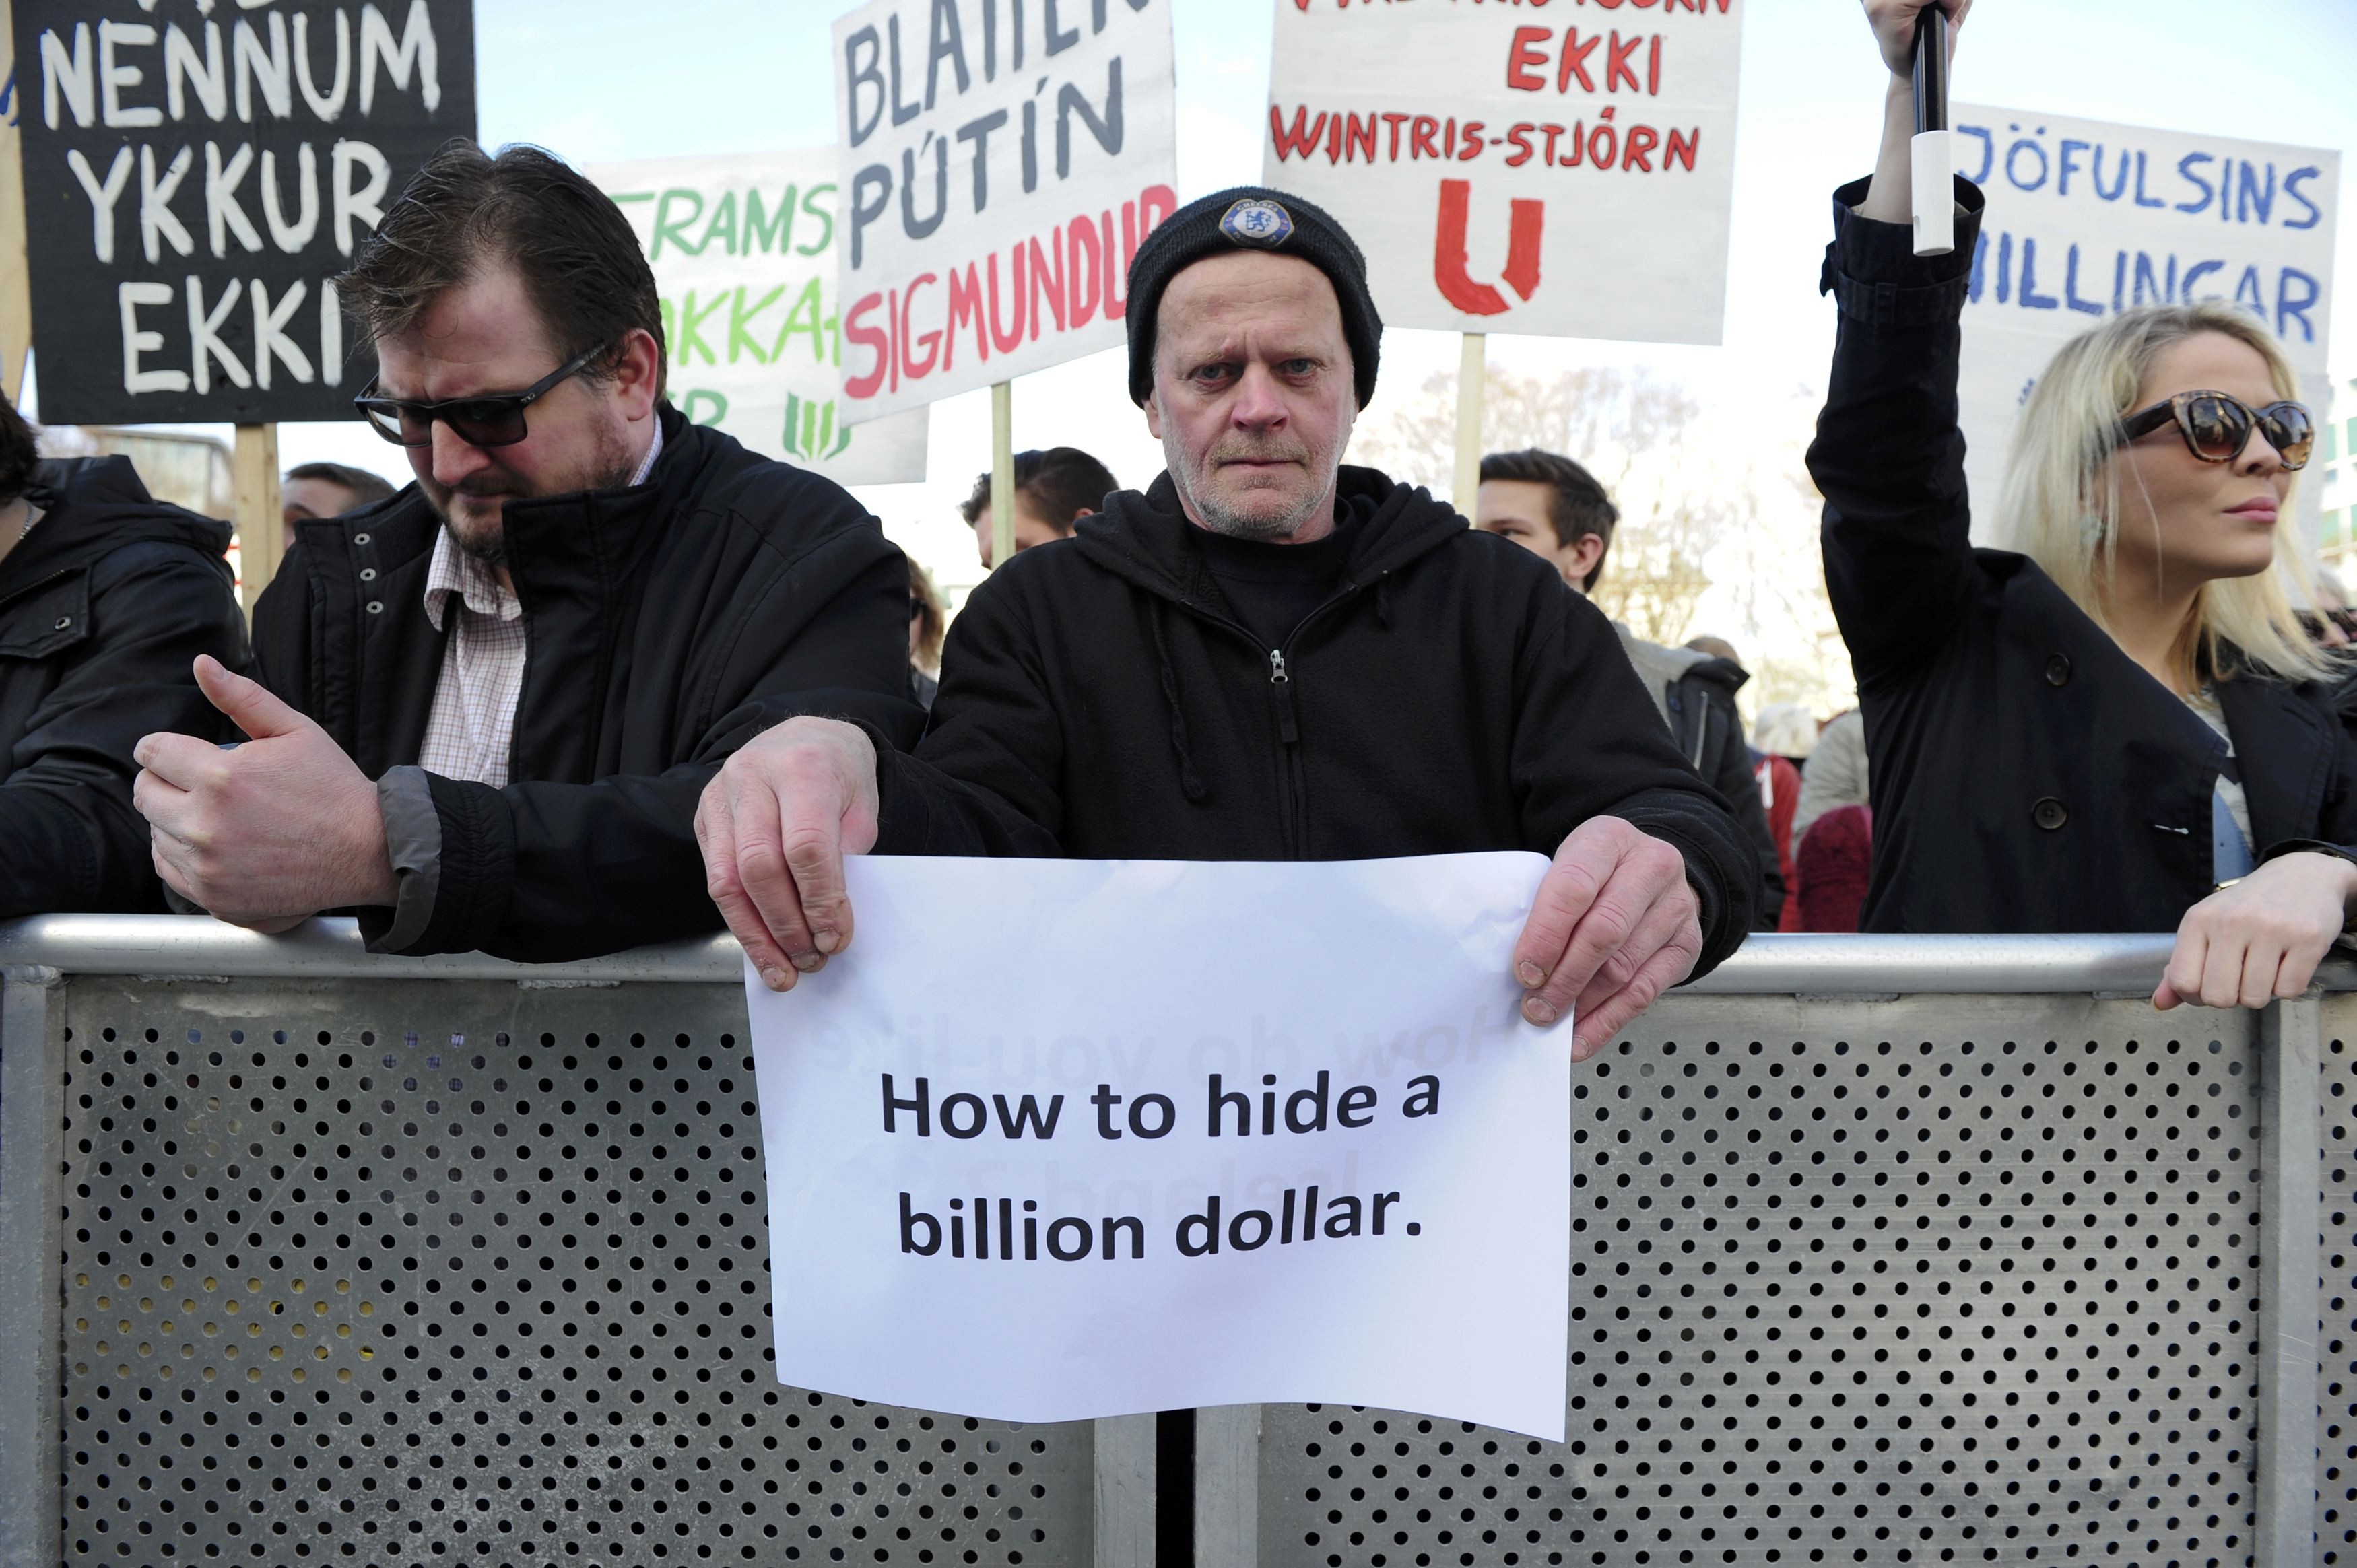 A protest against tax evasion in Iceland in 2016 following leaked tax documents known as the Panama Papers. Photo: Reuters